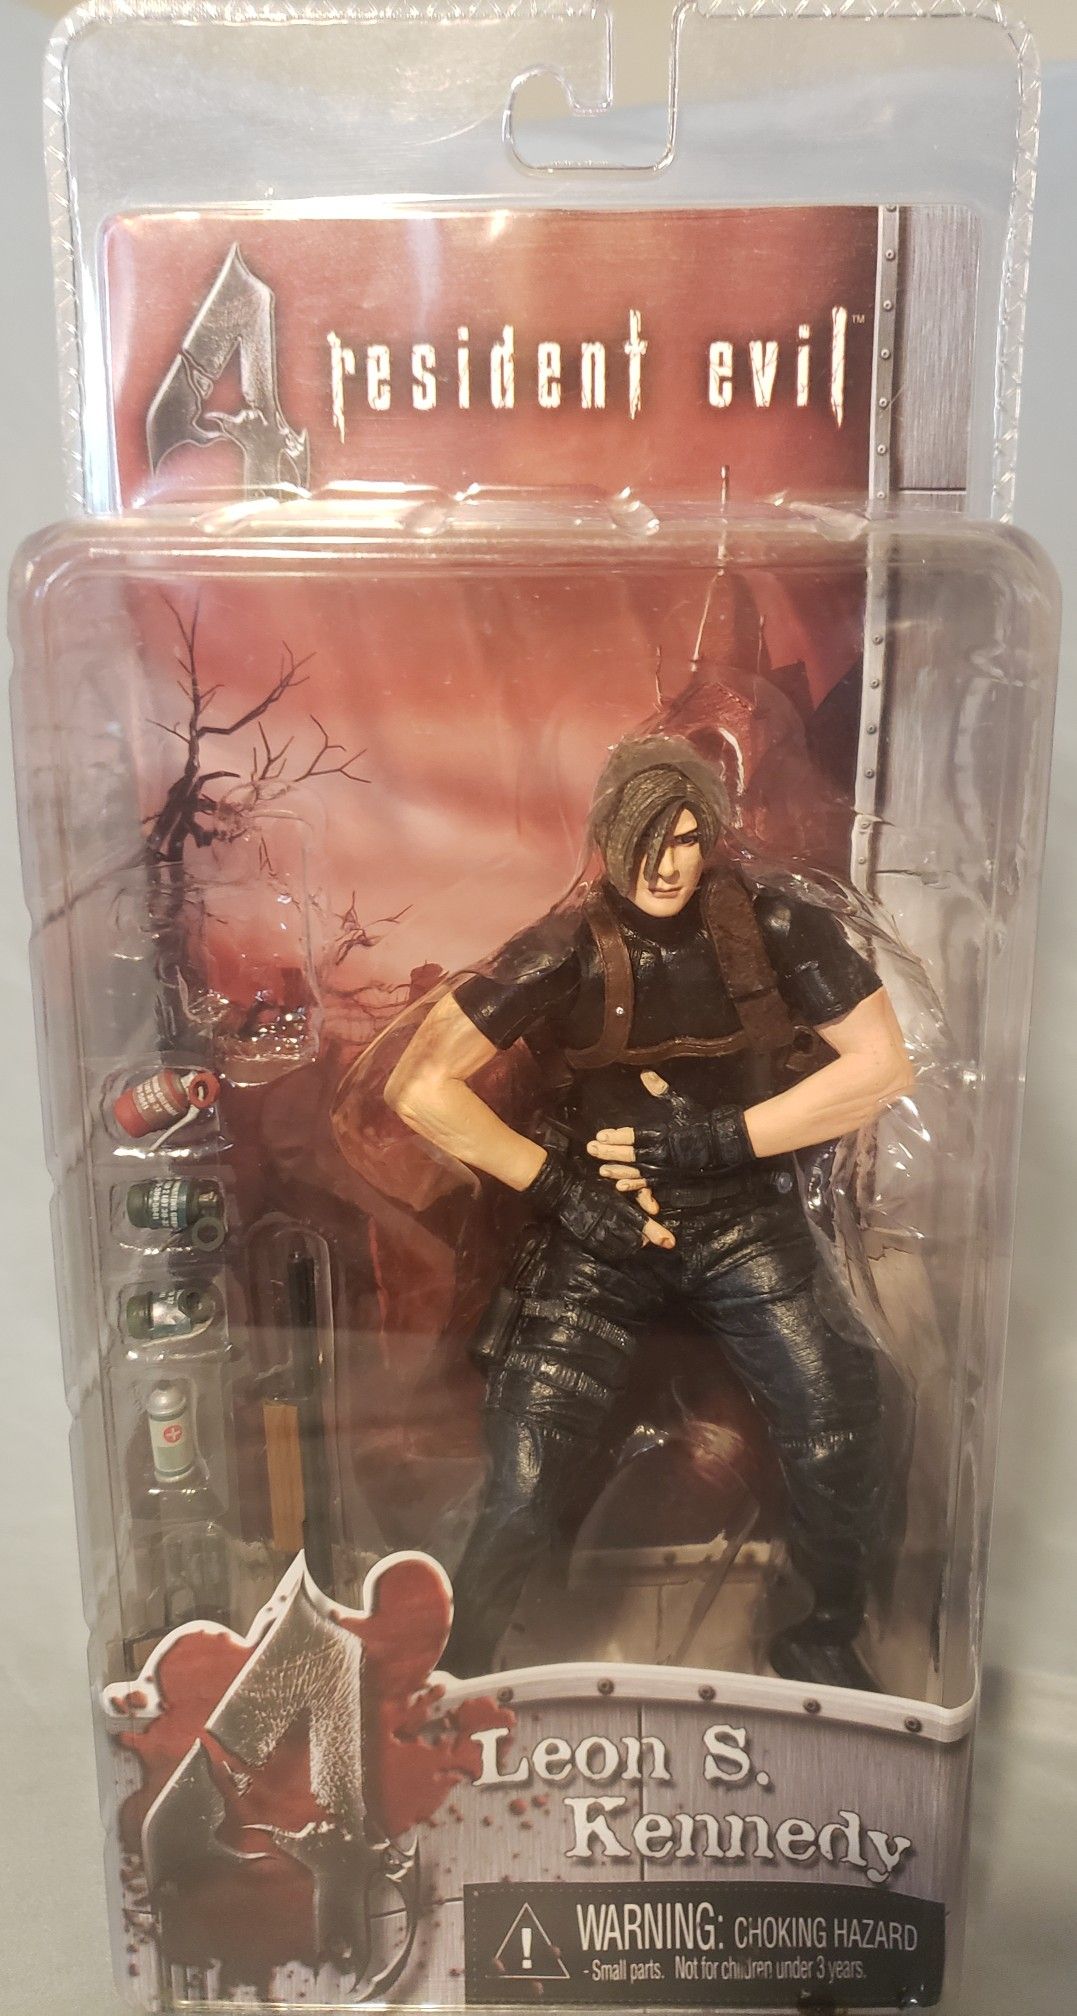 NECA Resident Evil 4 Leon S. Kennedy Action Figure. Condition is New.